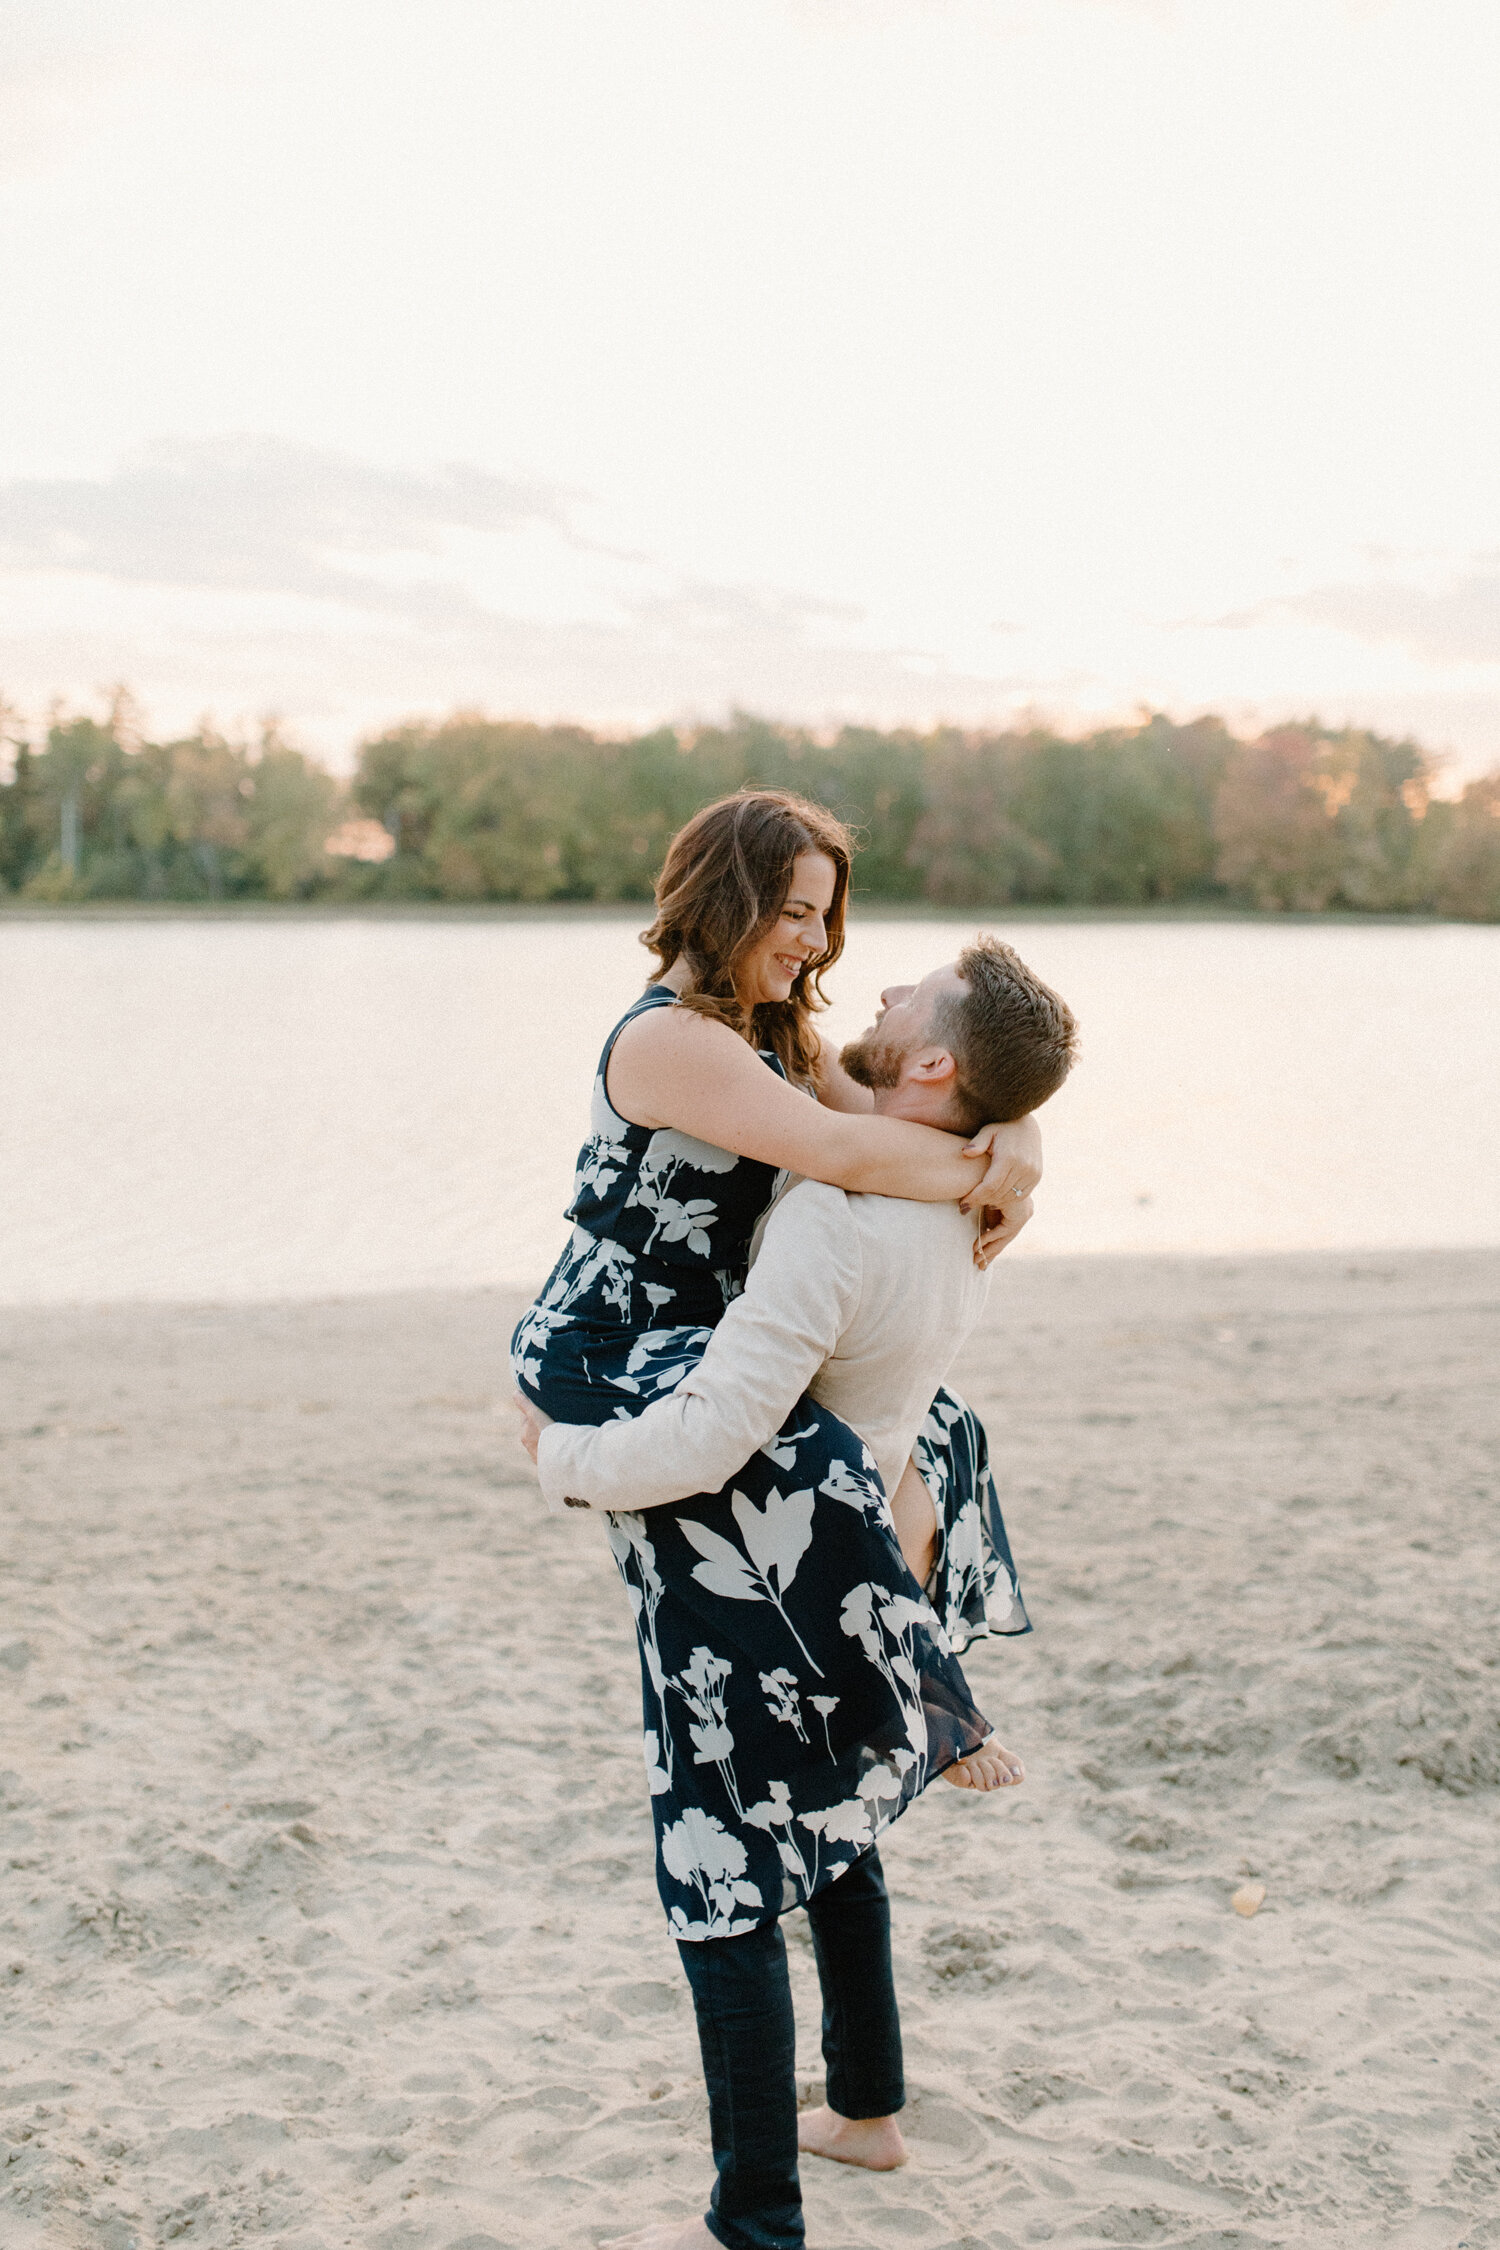  This playful soon-to-be groom picks up his finance and hold her in his arms during this beach engagement session in Ottawa, Canada by Chelsea Mason Photography. Formal beach engagement session outfit, man holding woman in his arms and laughing, play